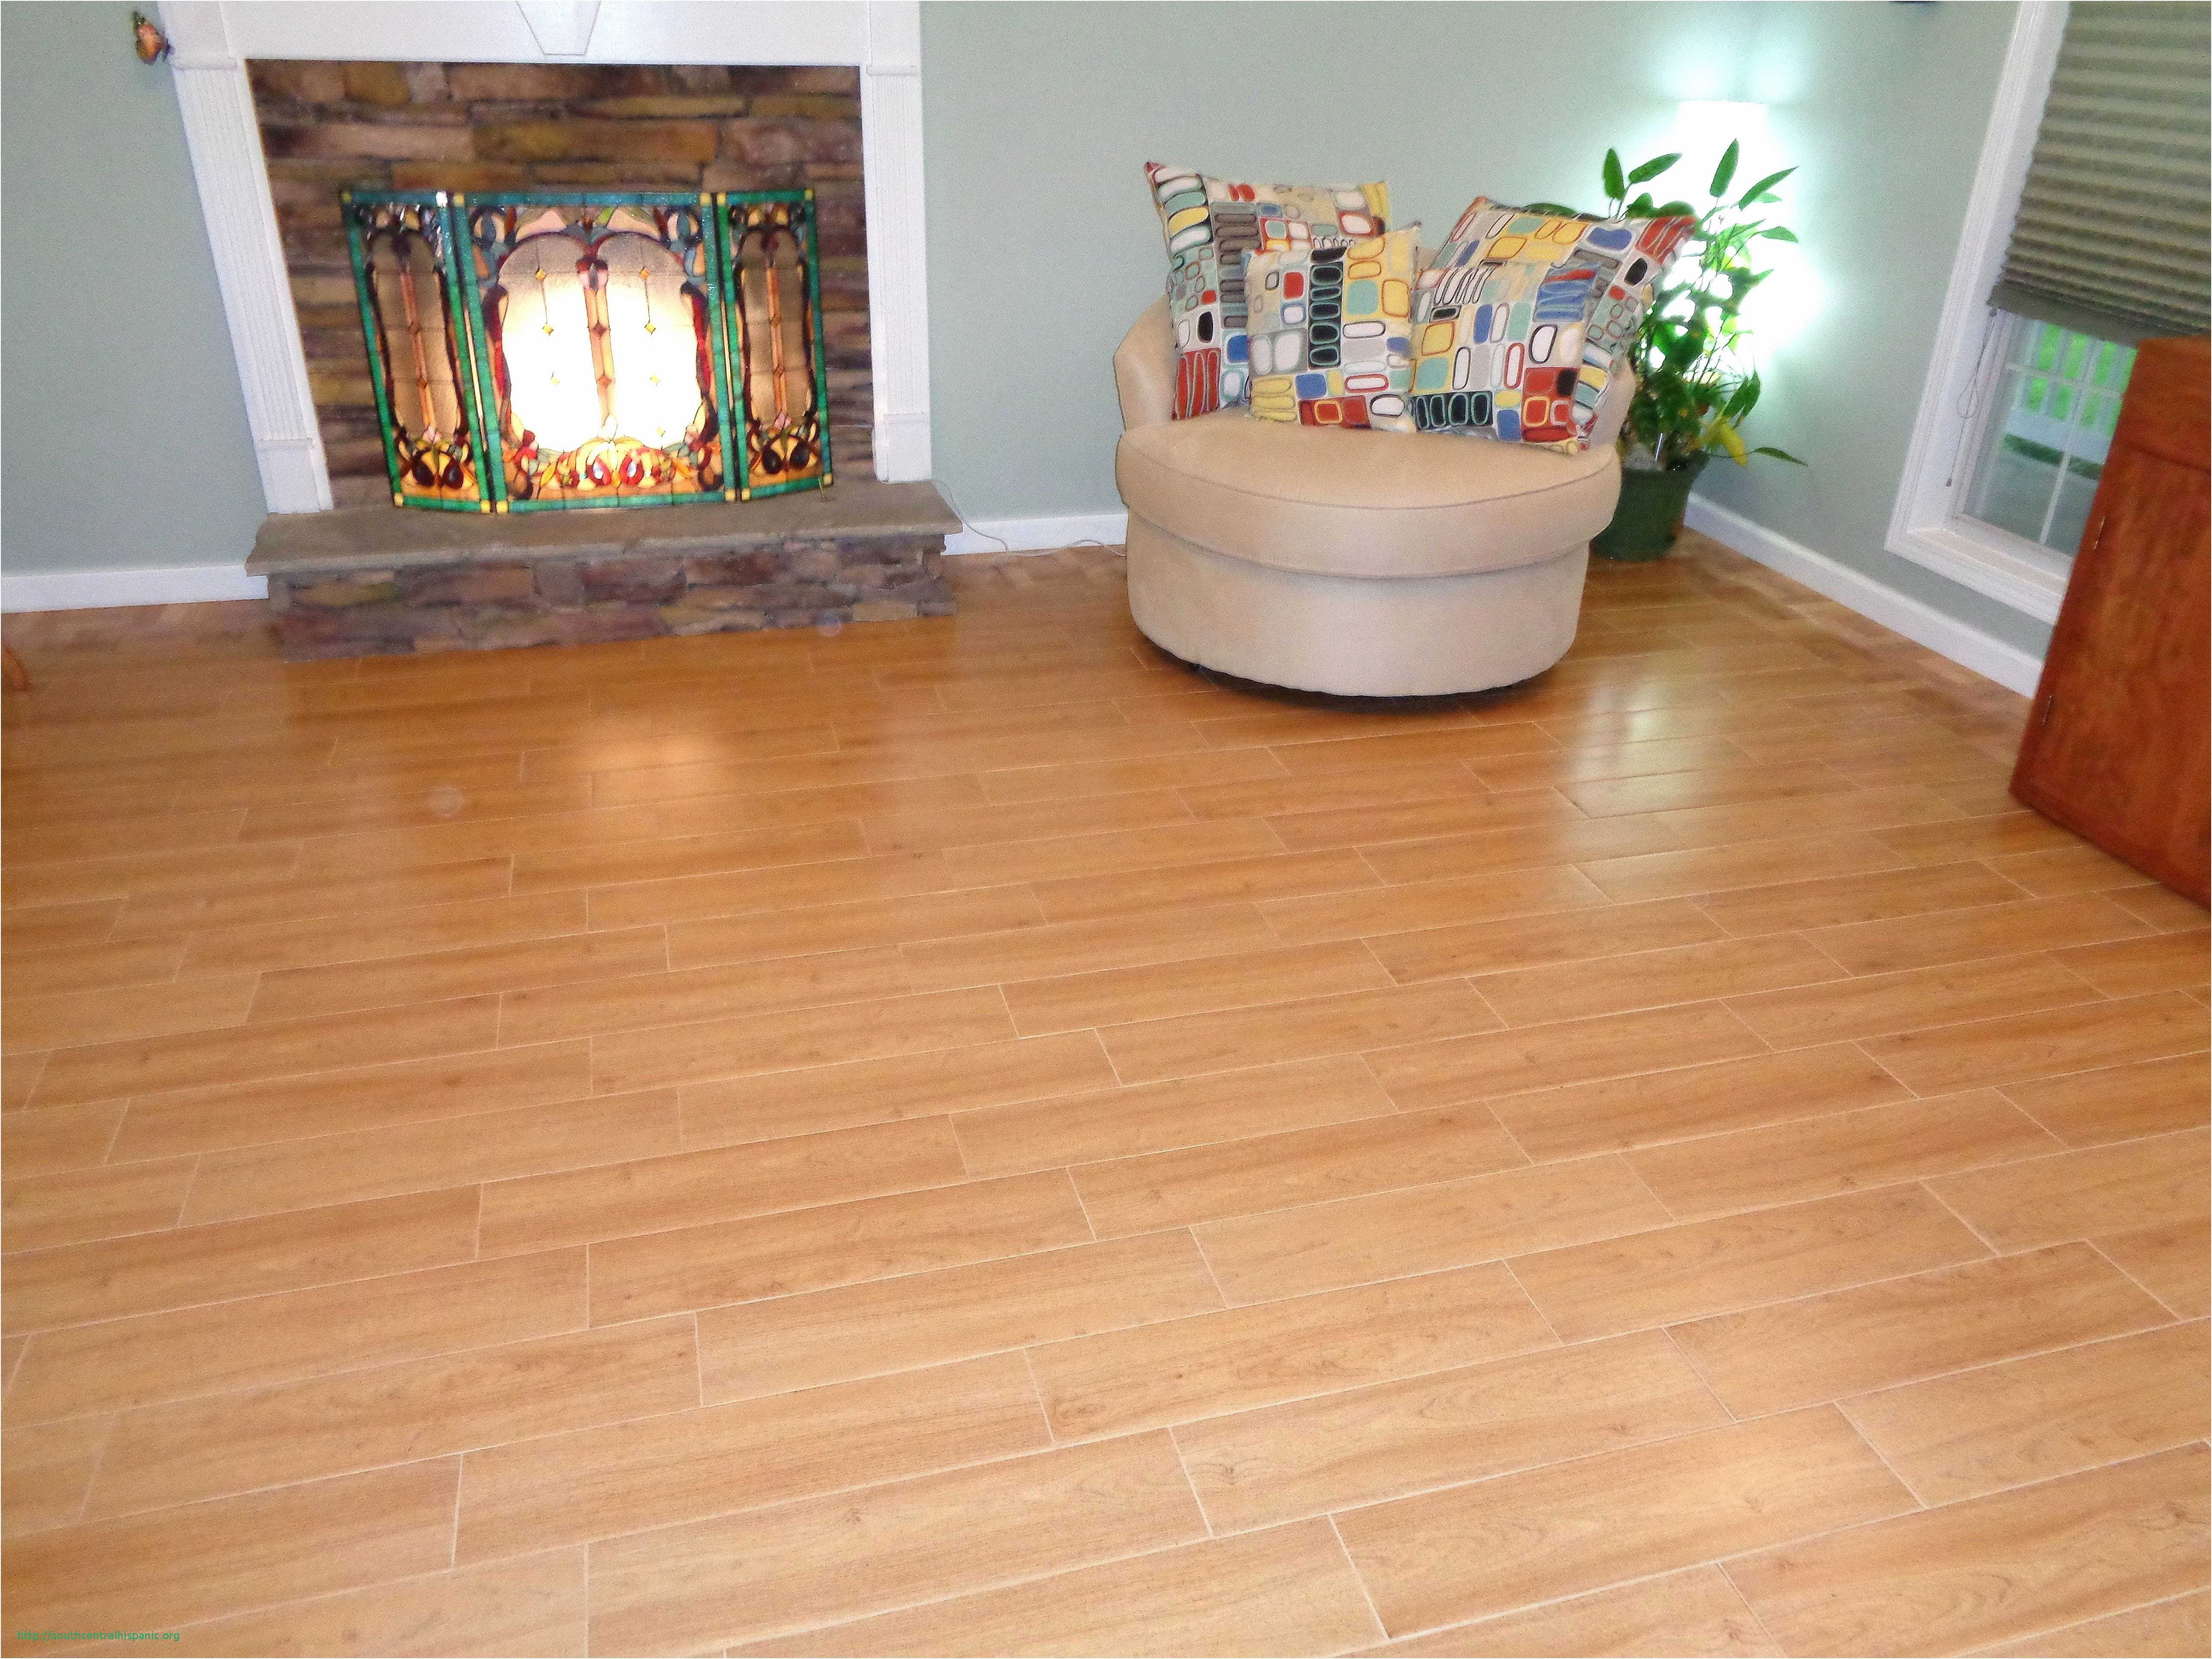 21 Elegant Can You Lay Hardwood Floors Over Tile 2024 free download can you lay hardwood floors over tile of astounding can you use laminate flooring in a bathroom nice with can you use laminate flooring in a bathroom brilliant laminate flooring bathroom woo